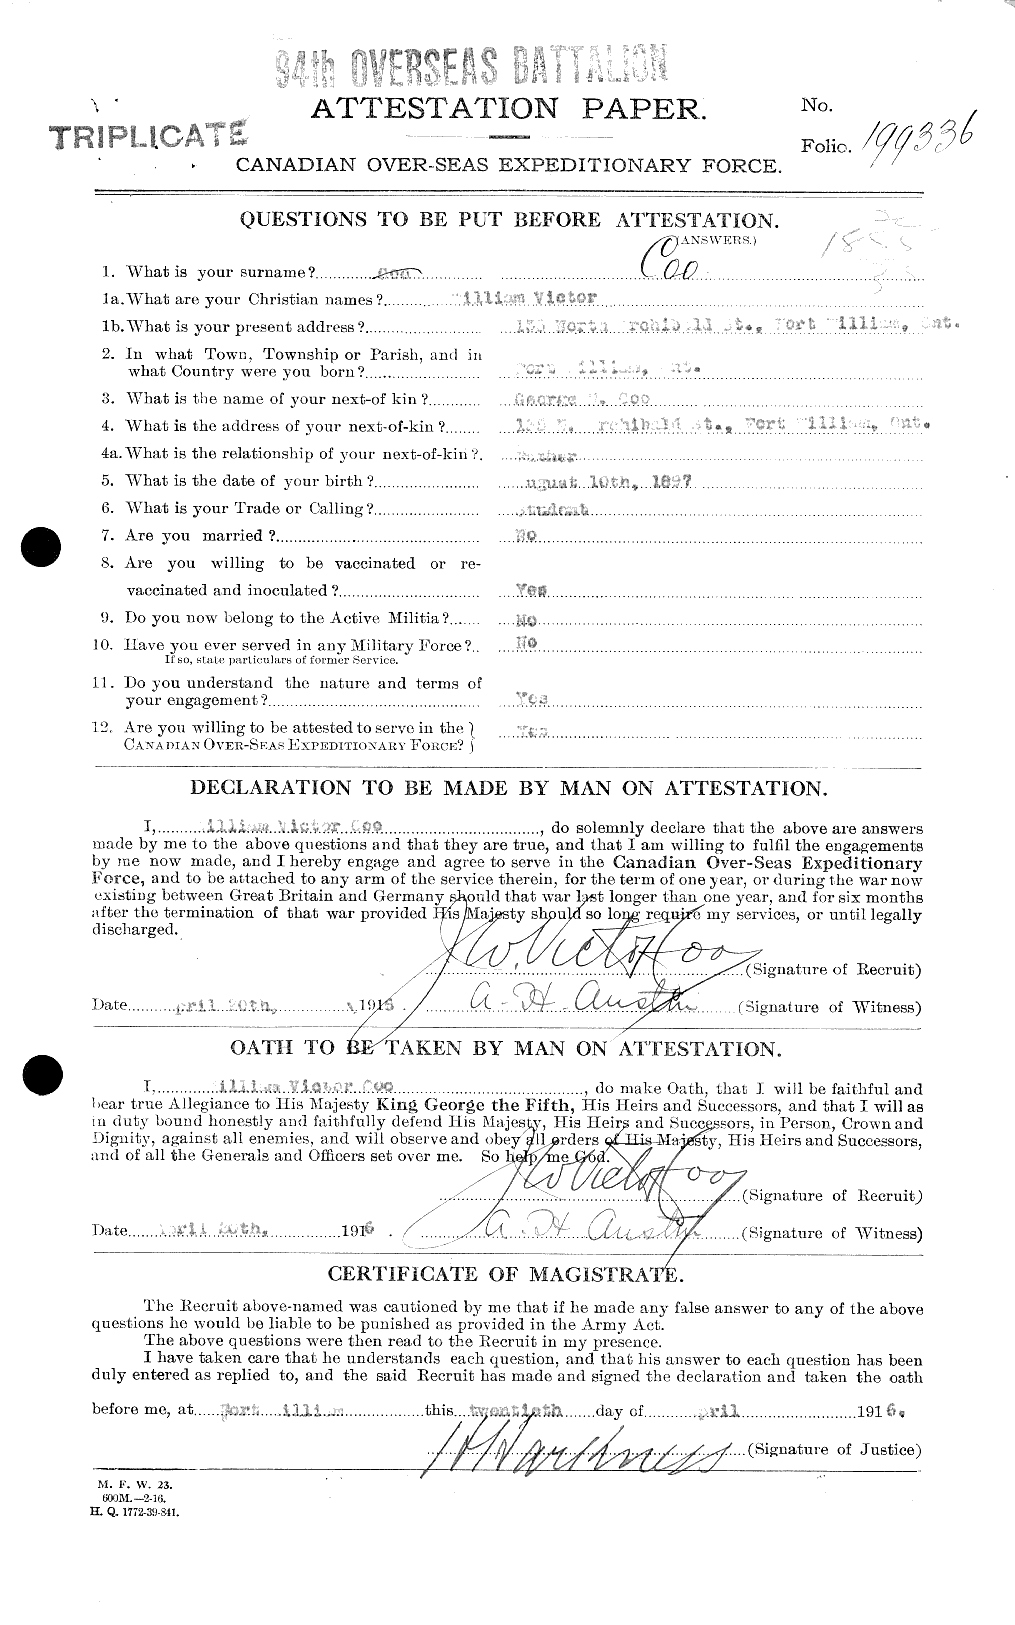 Personnel Records of the First World War - CEF 038680a